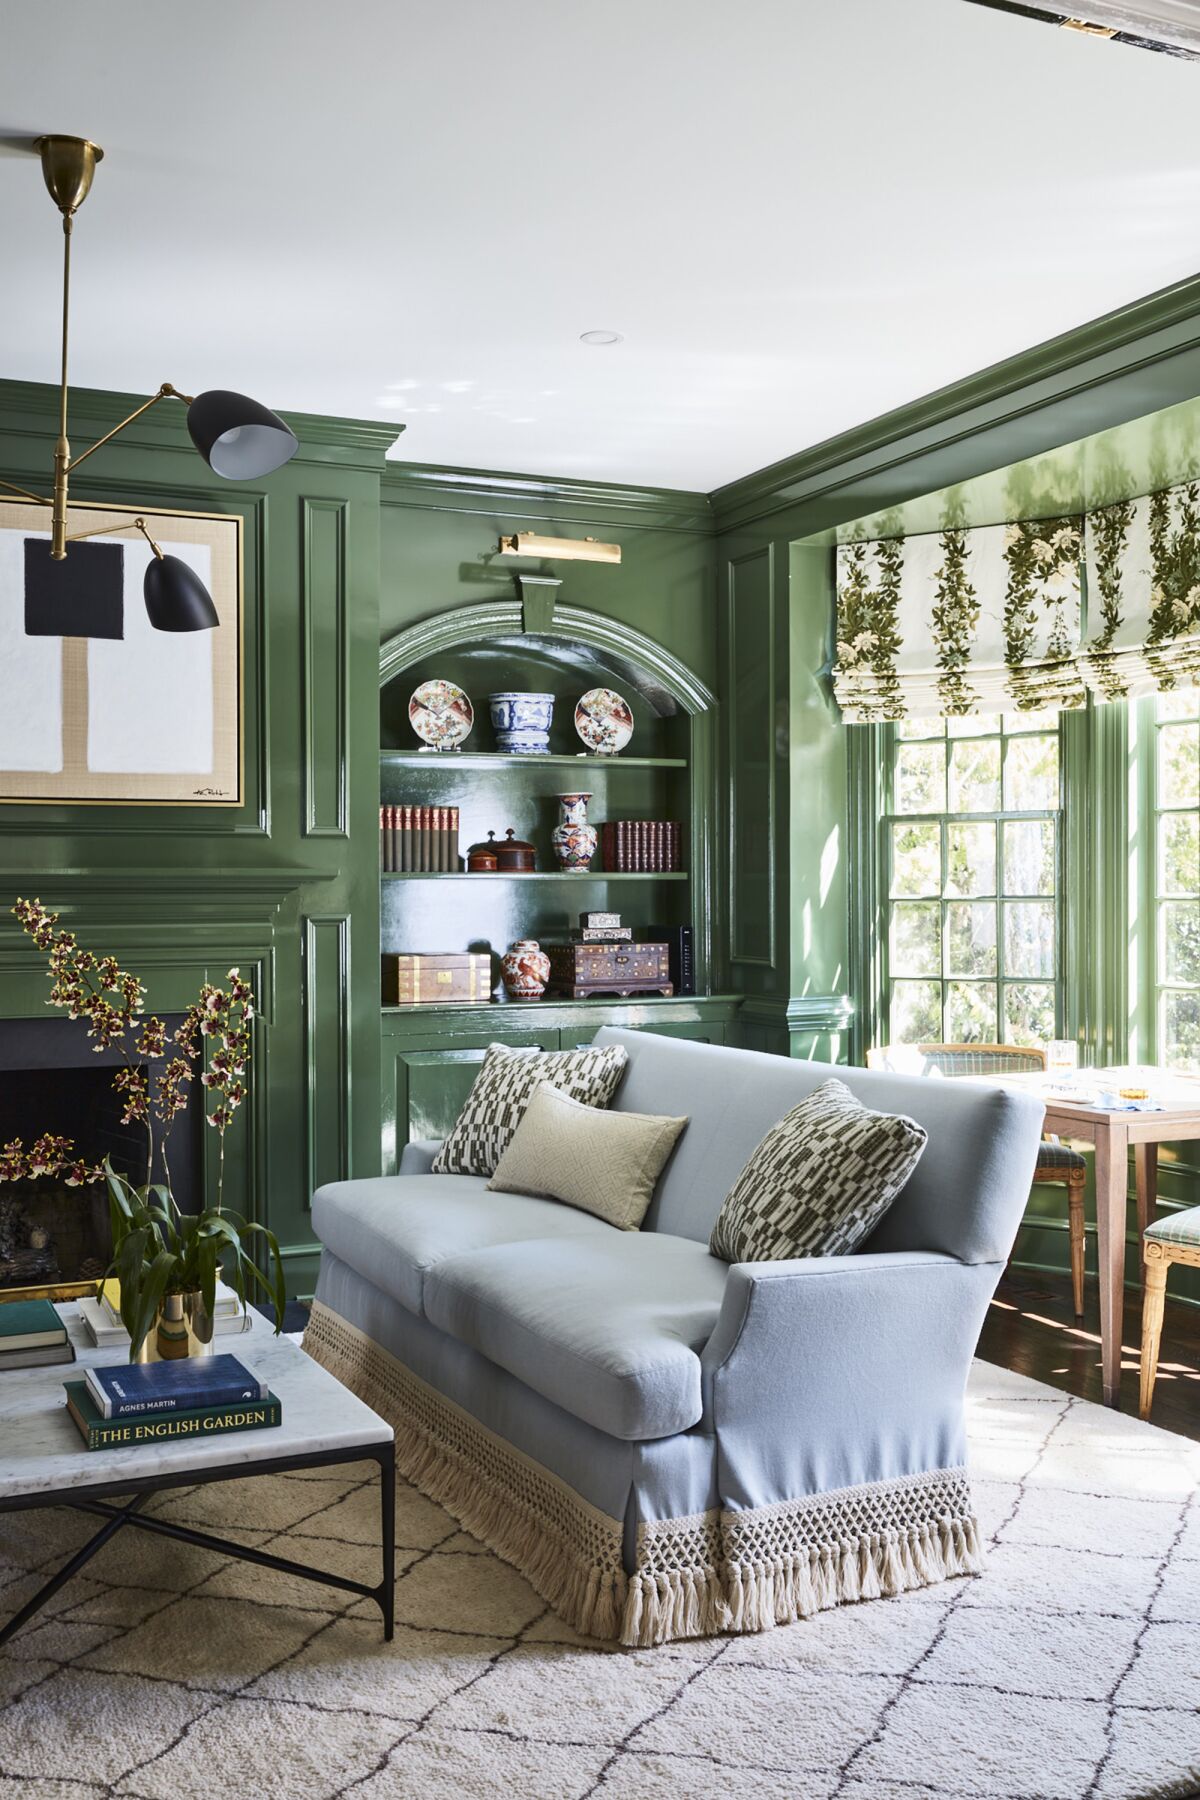 An airy home library has walls painted in a brighter shade of green with a glossy finish.